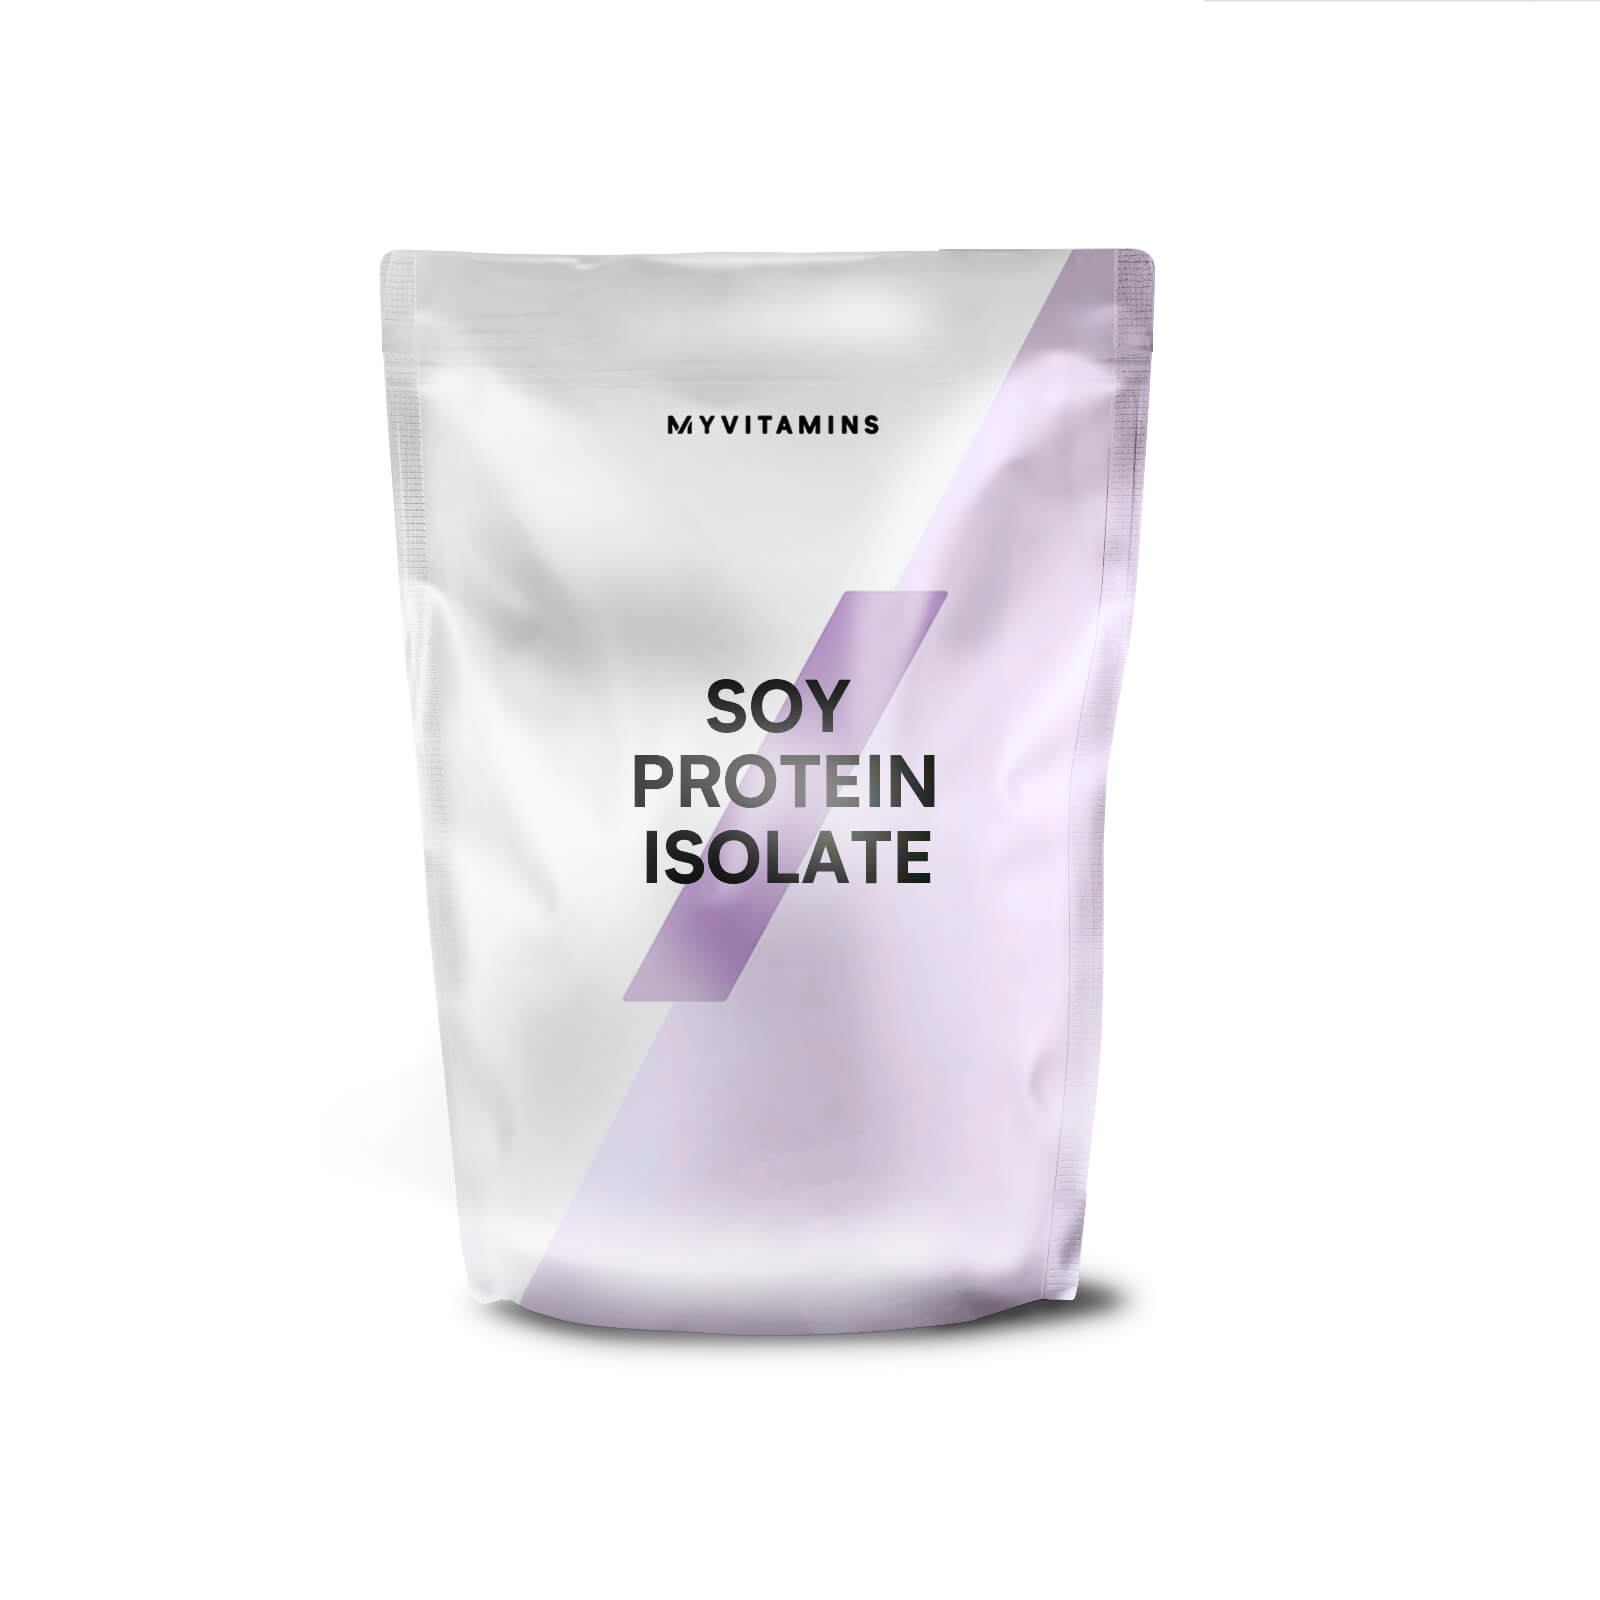 Myvitamins Soy Protein Isolate - 1KG - Pouch - Unflavoured